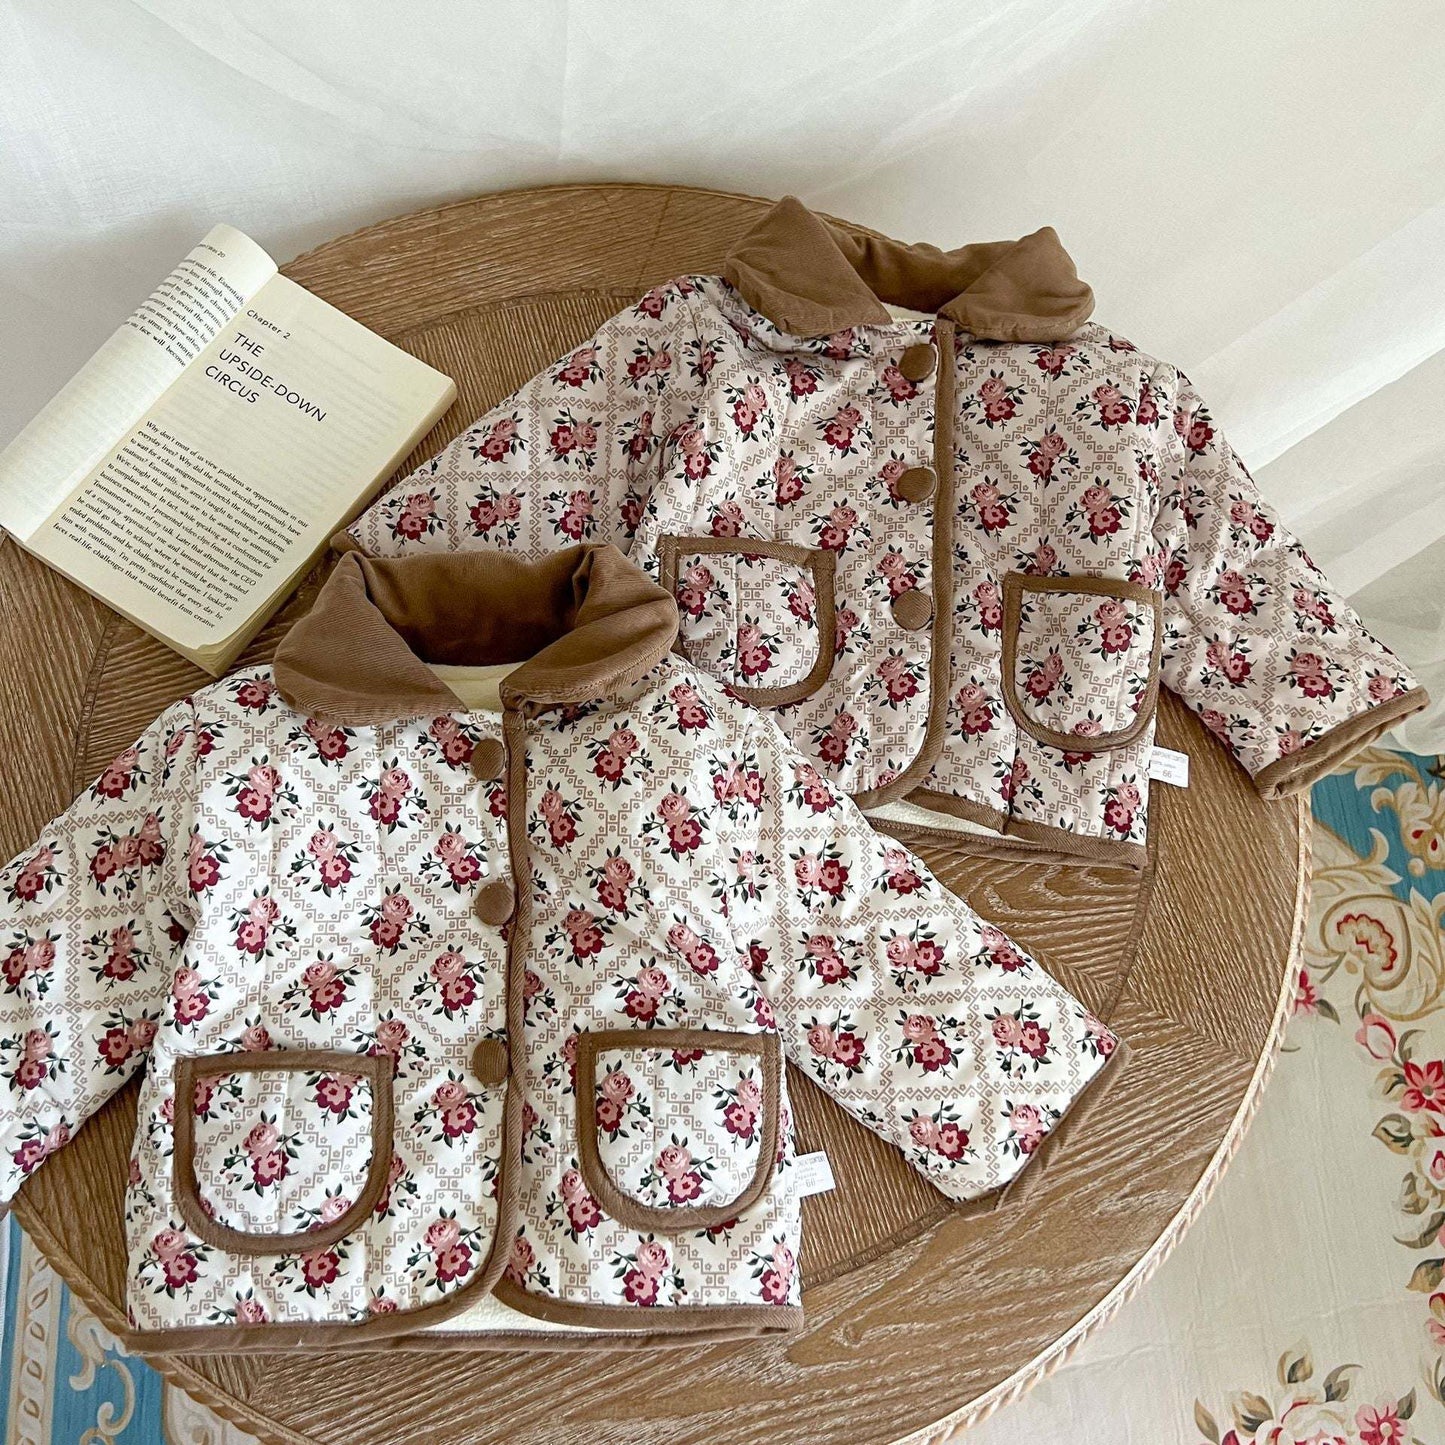 Baby Floral Print Pattern Quilted Warm Padded Jacket In Winter